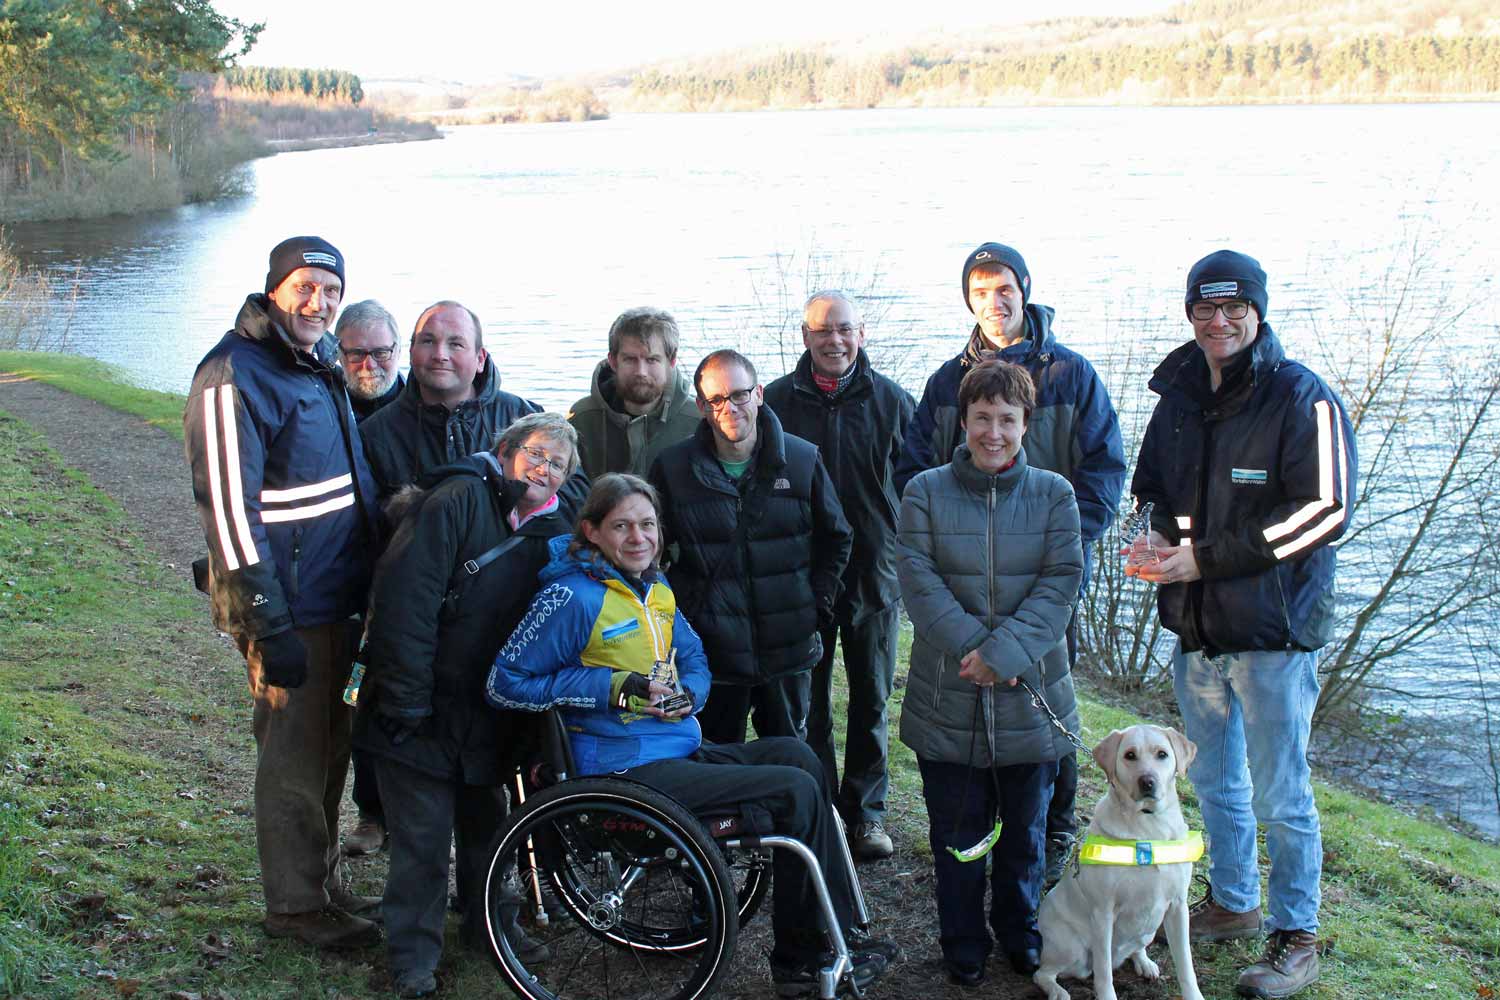 Craig-Grimes-from-charity-Experience-Community-(centre)-and-Yorkshire-Water-presented-with-the-inclusive-access-award-from-Open-Country-at-Fewston-reservoir-near-Harrogate